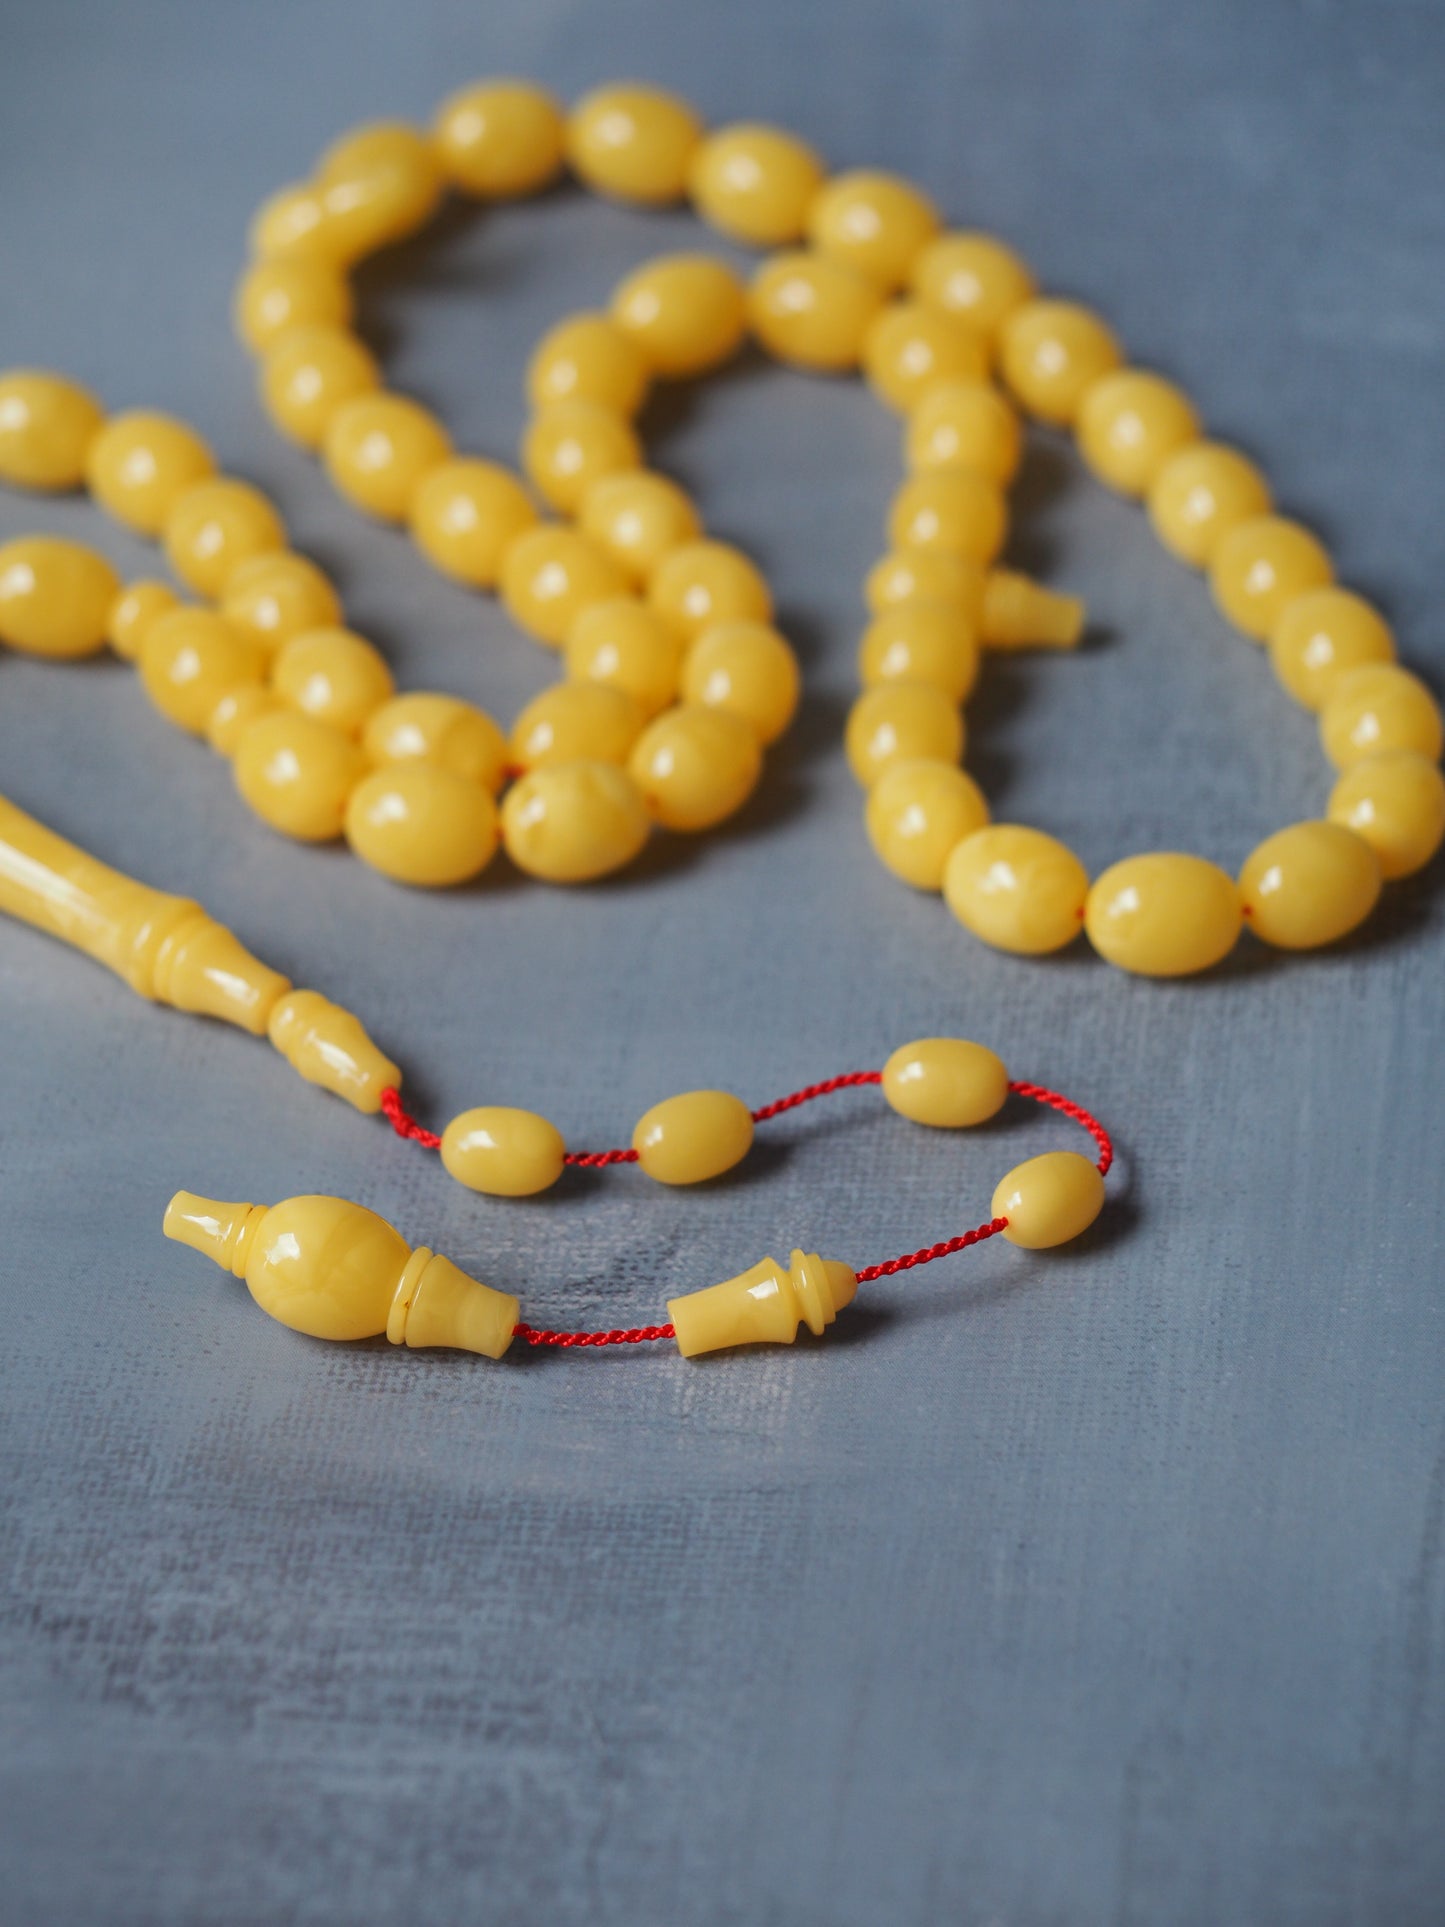 Unique Natural Pure Butterscotch Amber Tasbih / Rosary made of One Piece of Amber